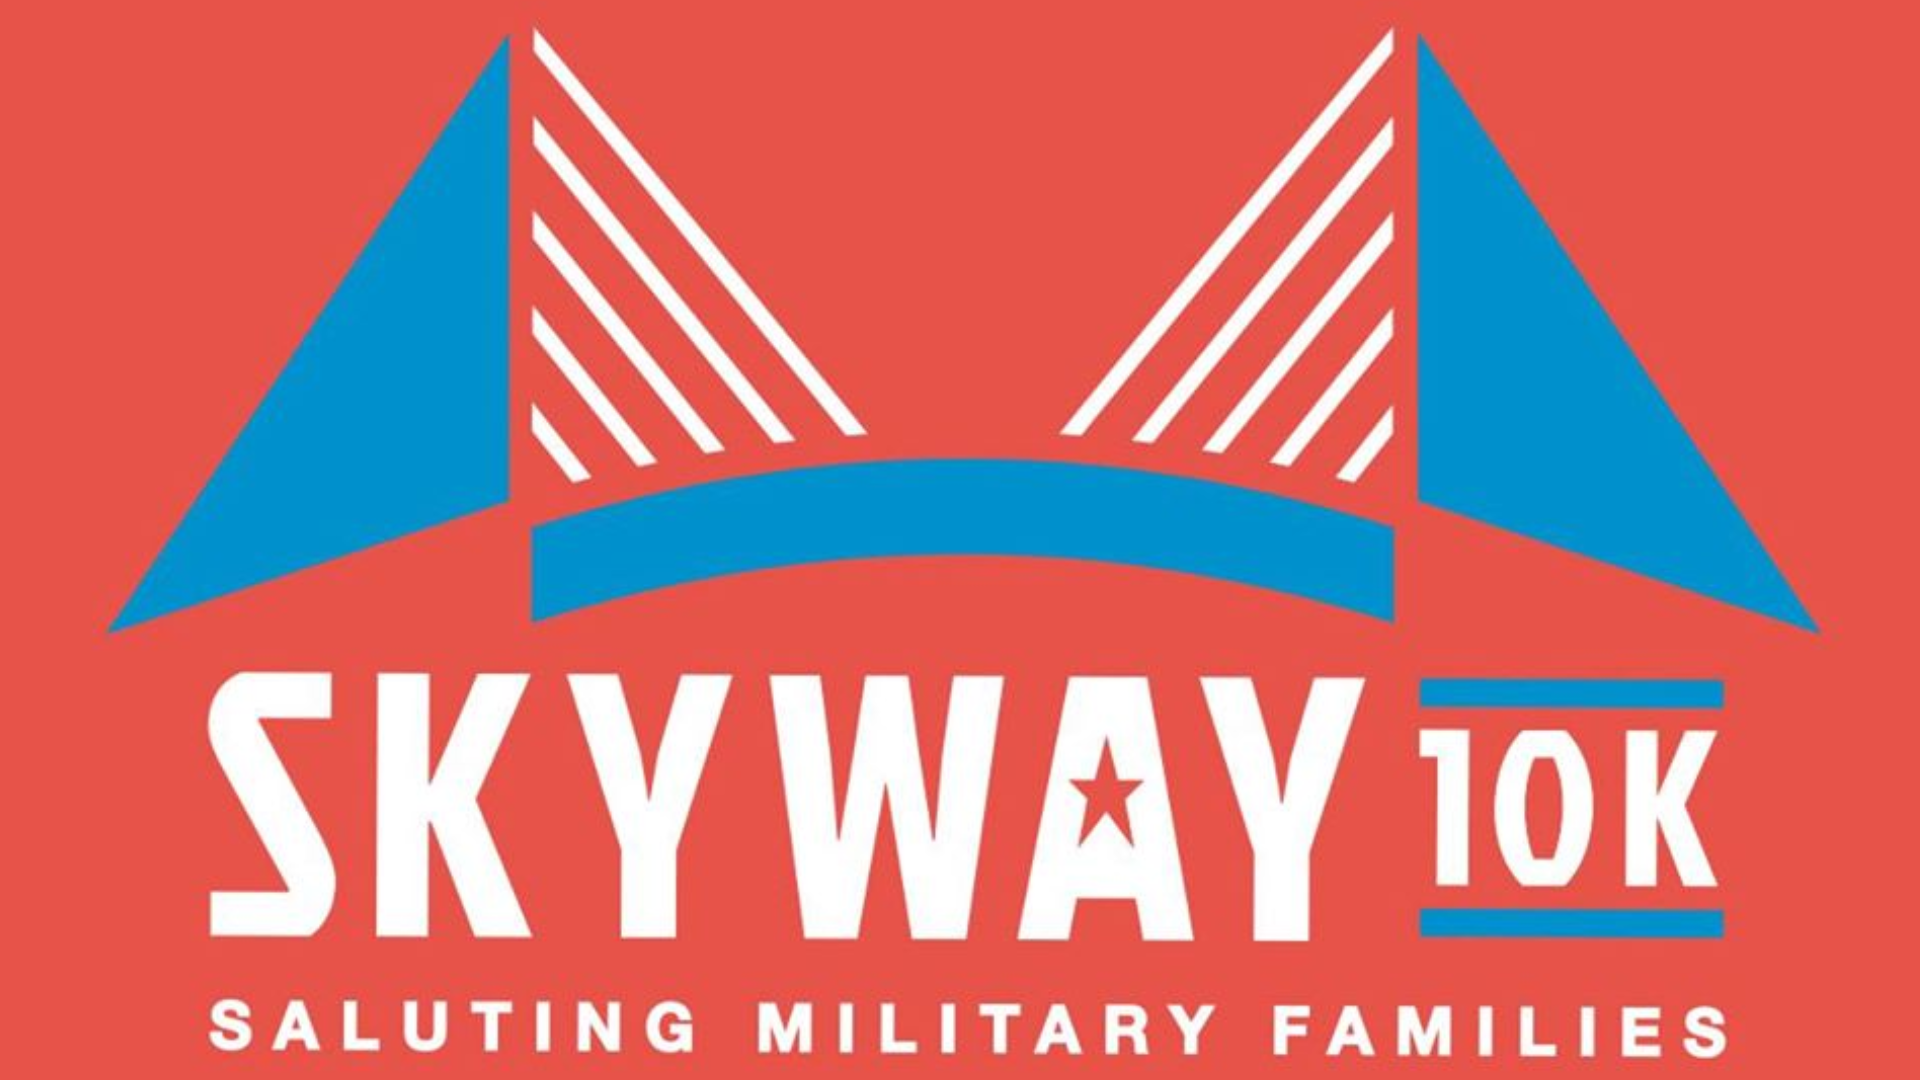 Skyway 10K Contest Enter to win 2 registrations from 10News WTSP